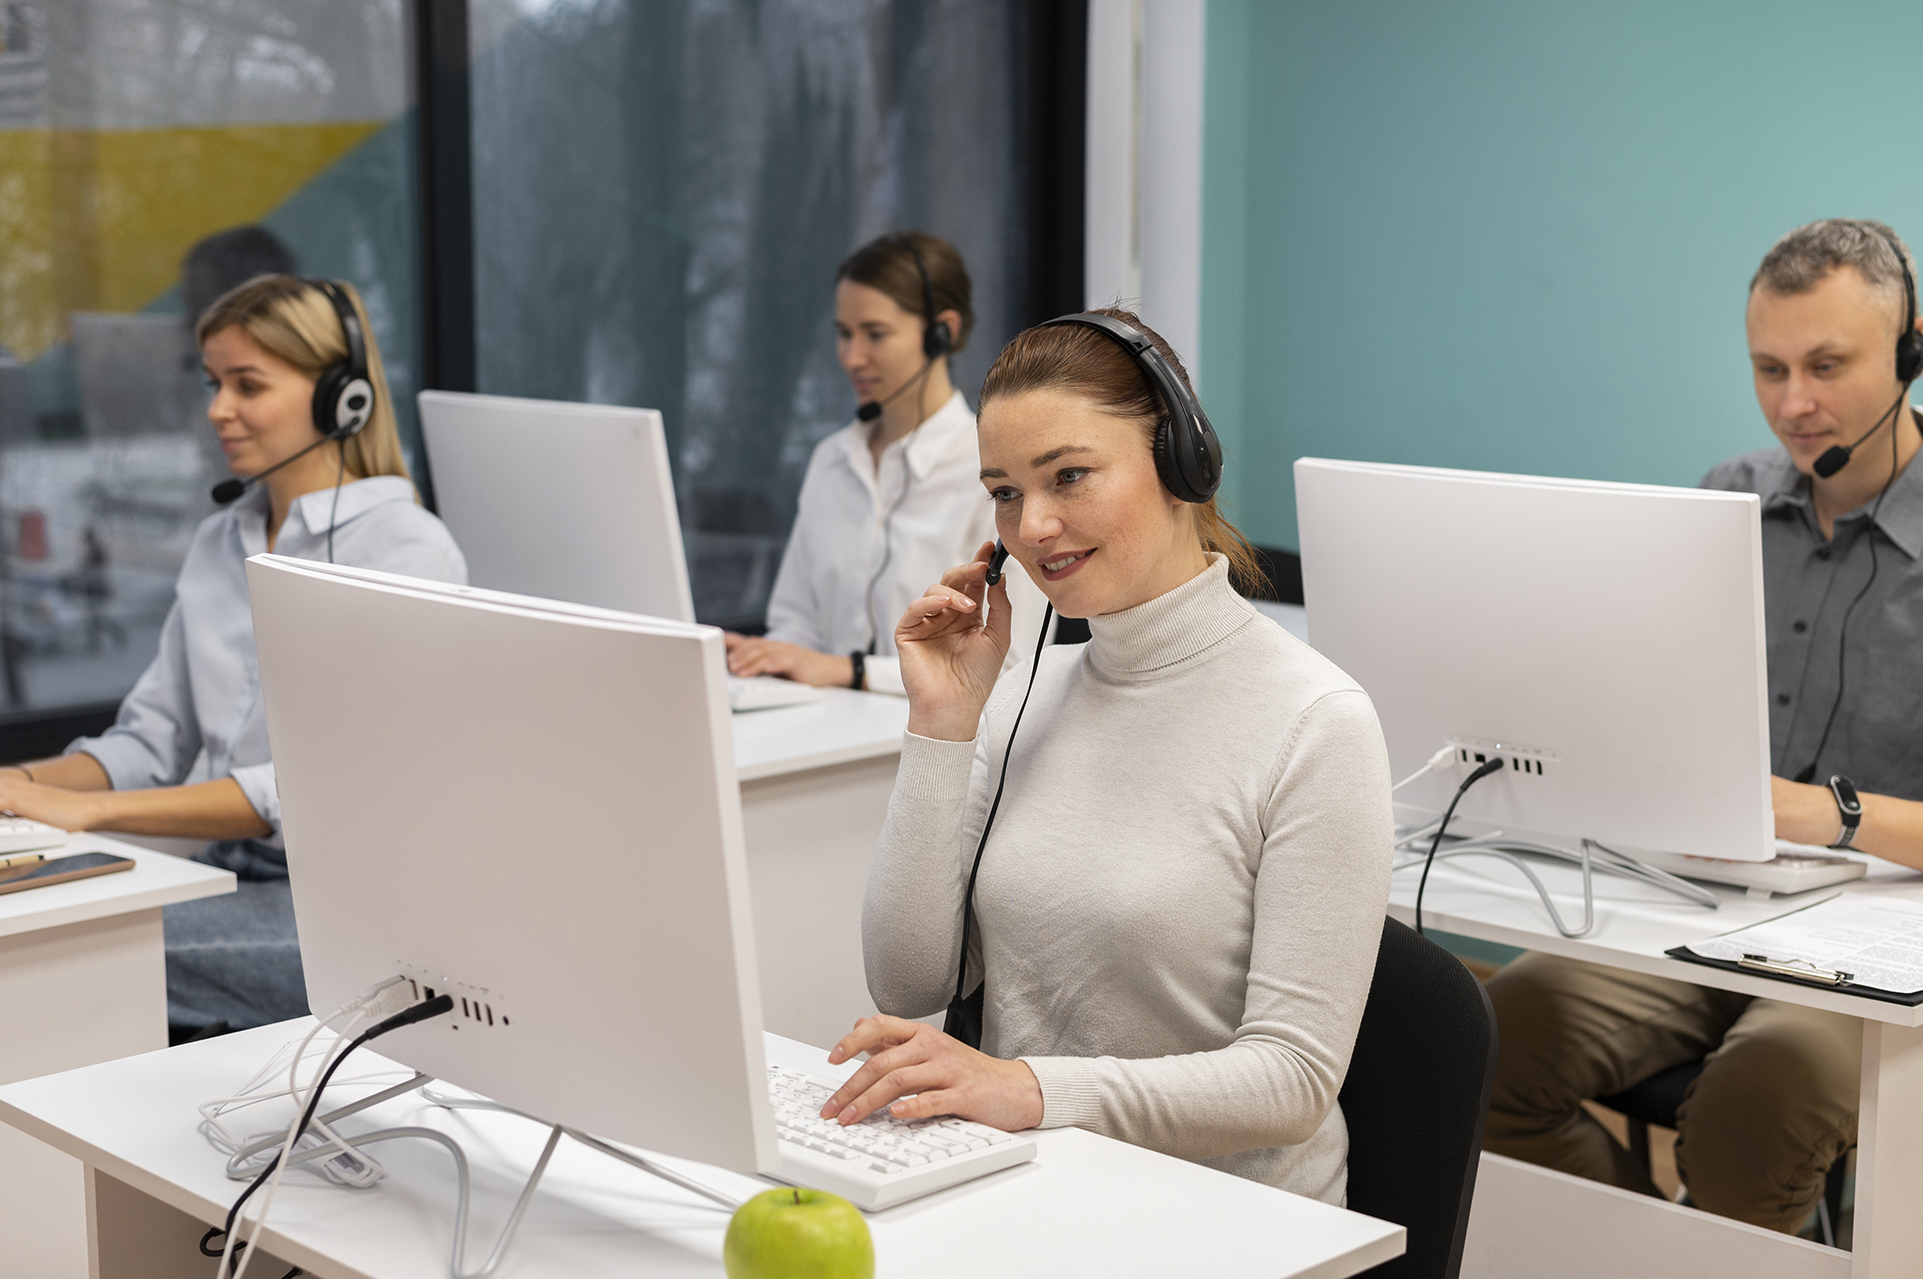 colleagues-with-headphones-working-call-center-office